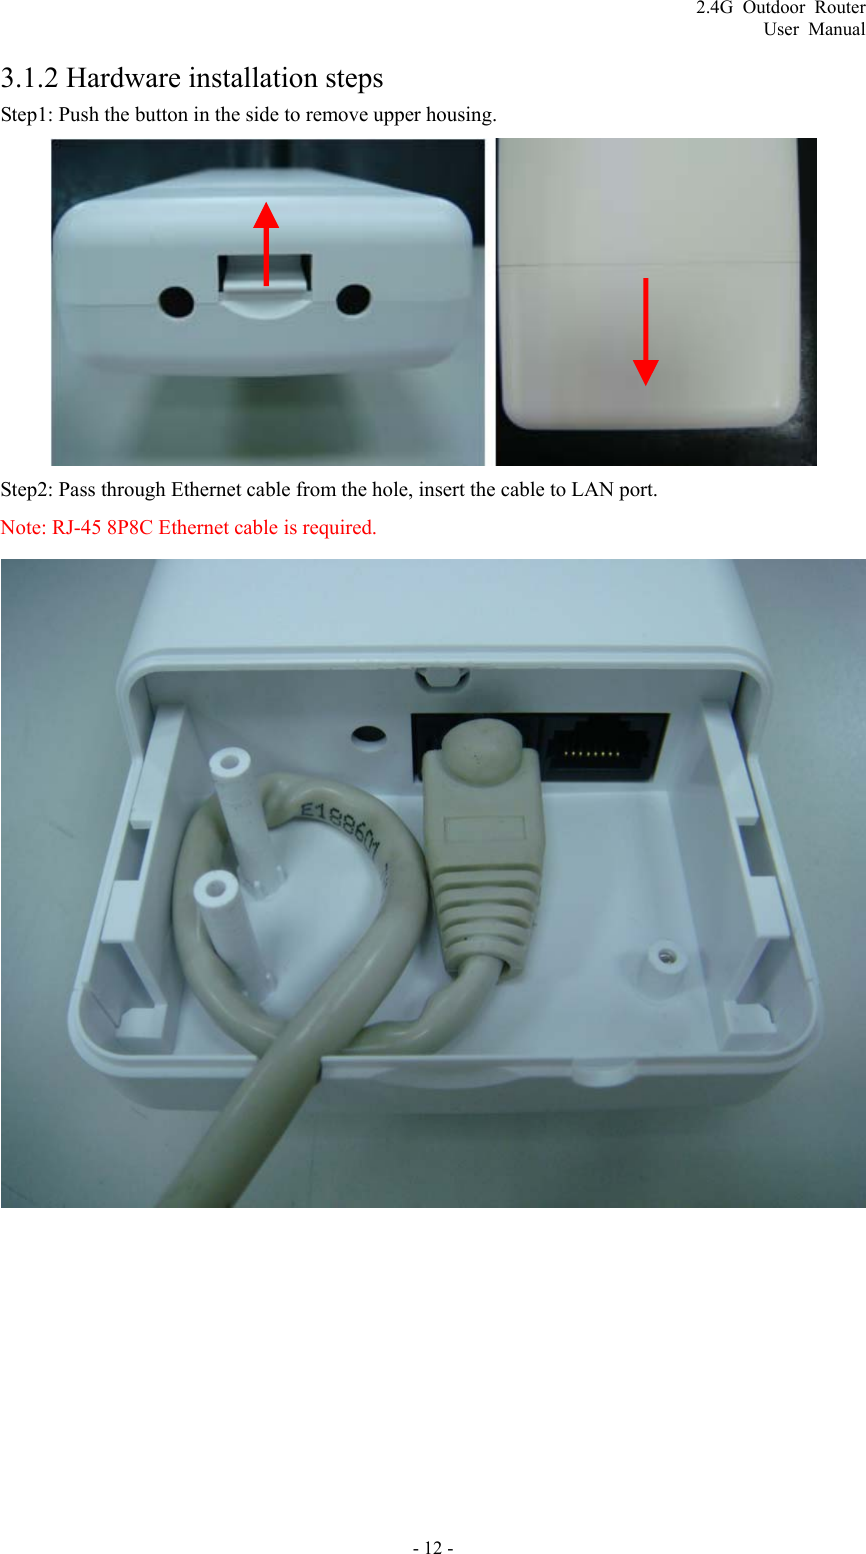 2.4G Outdoor Router User Manual 3.1.2 Hardware installation steps Step1: Push the button in the side to remove upper housing.  Step2: Pass through Ethernet cable from the hole, insert the cable to LAN port. Note: RJ-45 8P8C Ethernet cable is required.   - 12 - 